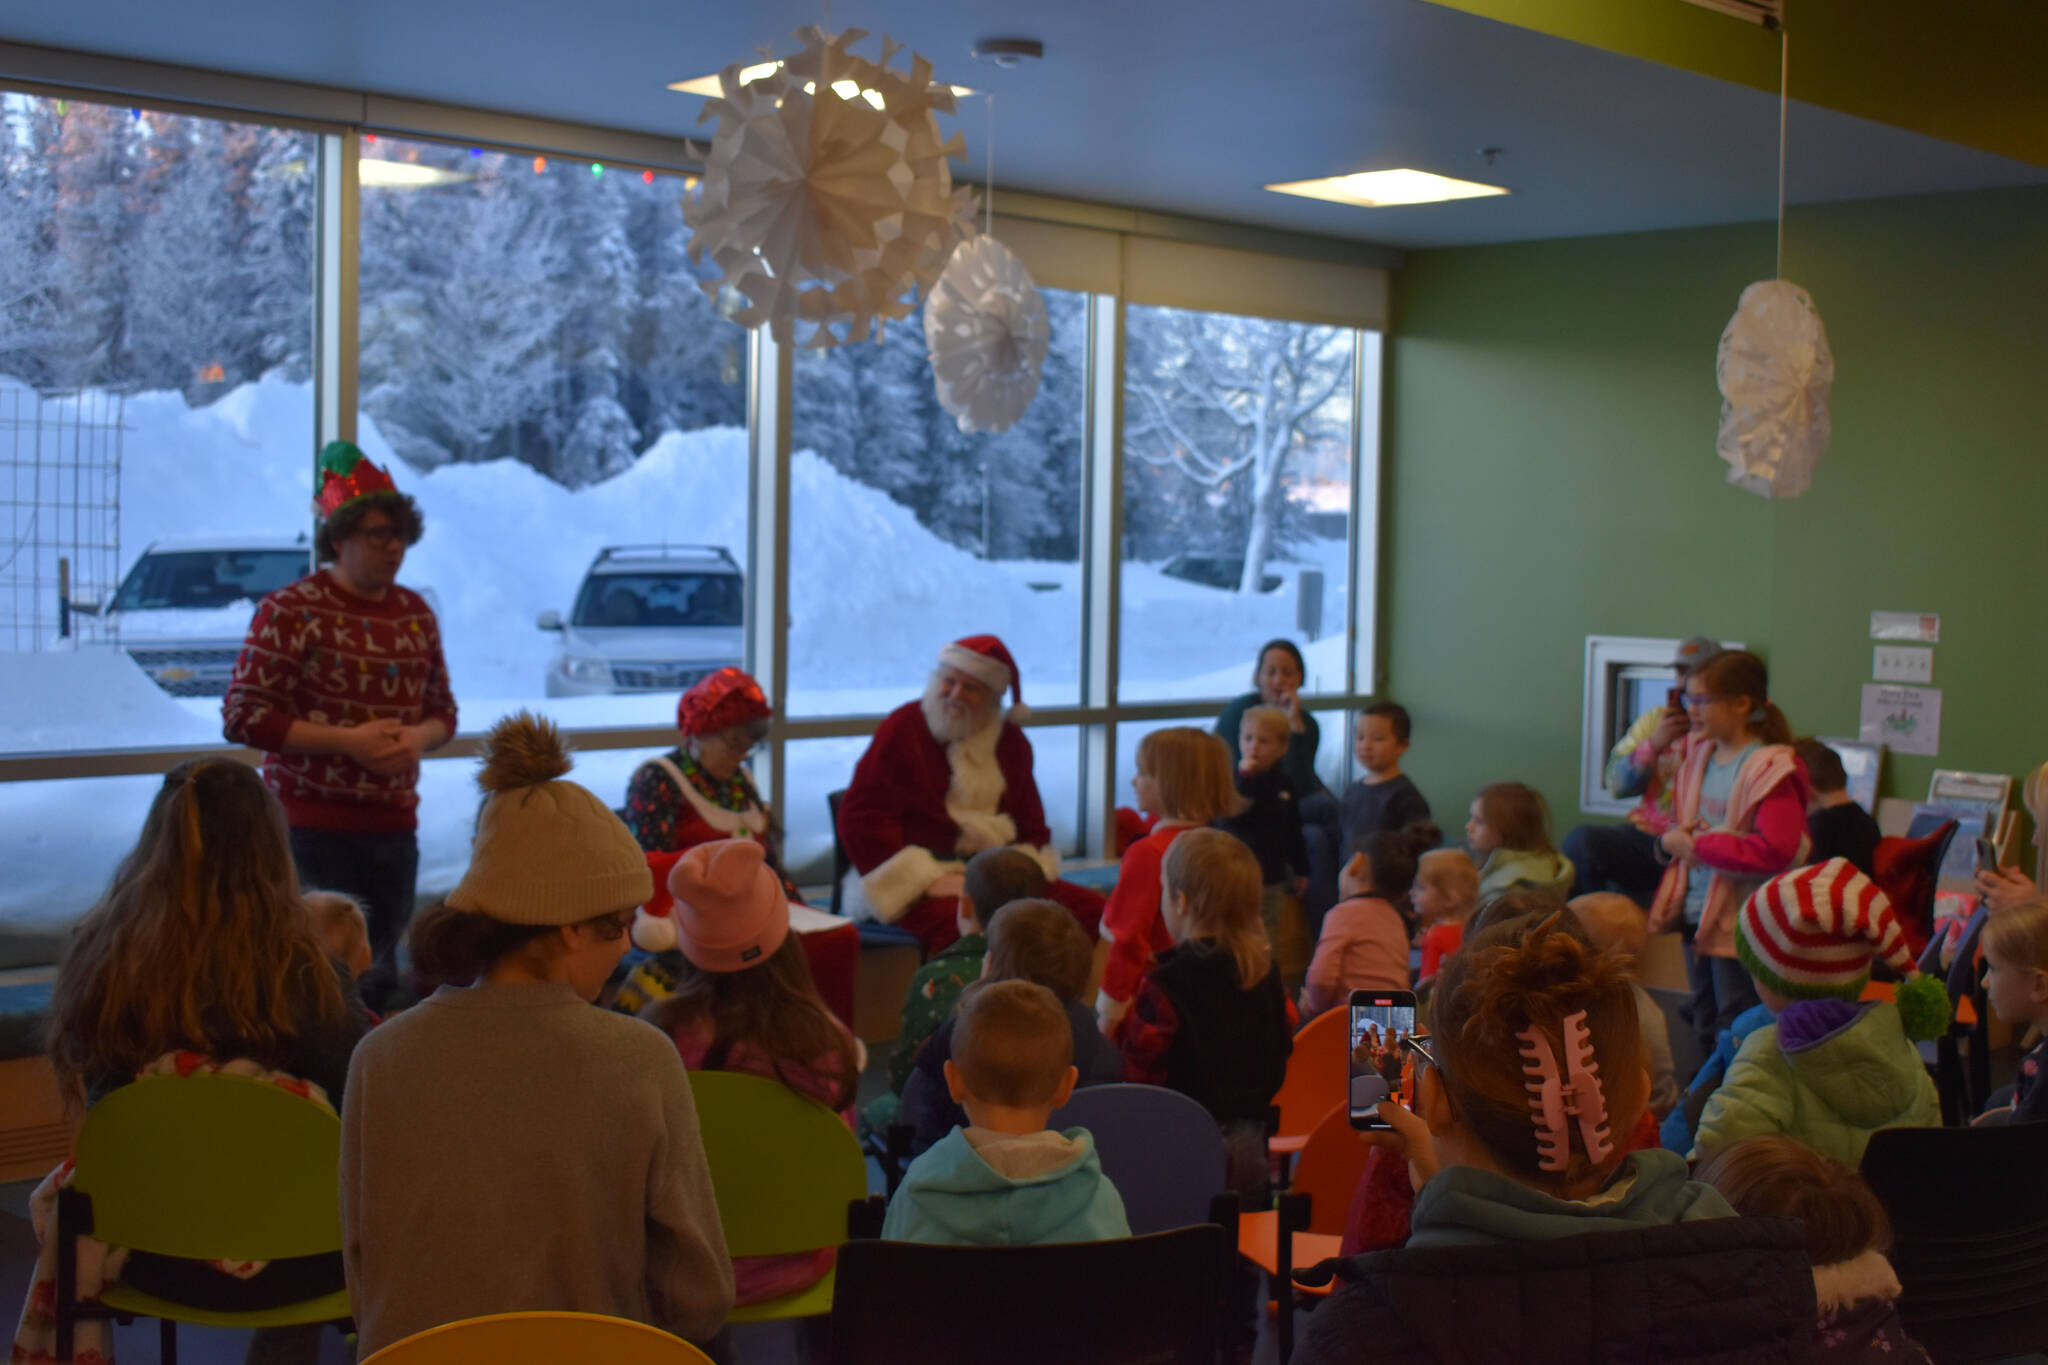 Children fill the Kid Zone during Story Time with Mrs. Claus at the Kenai Community Library in Kenai, Alaska, on Monday, Dec. 19, 2022. (Jake Dye/Peninsula Clarion)